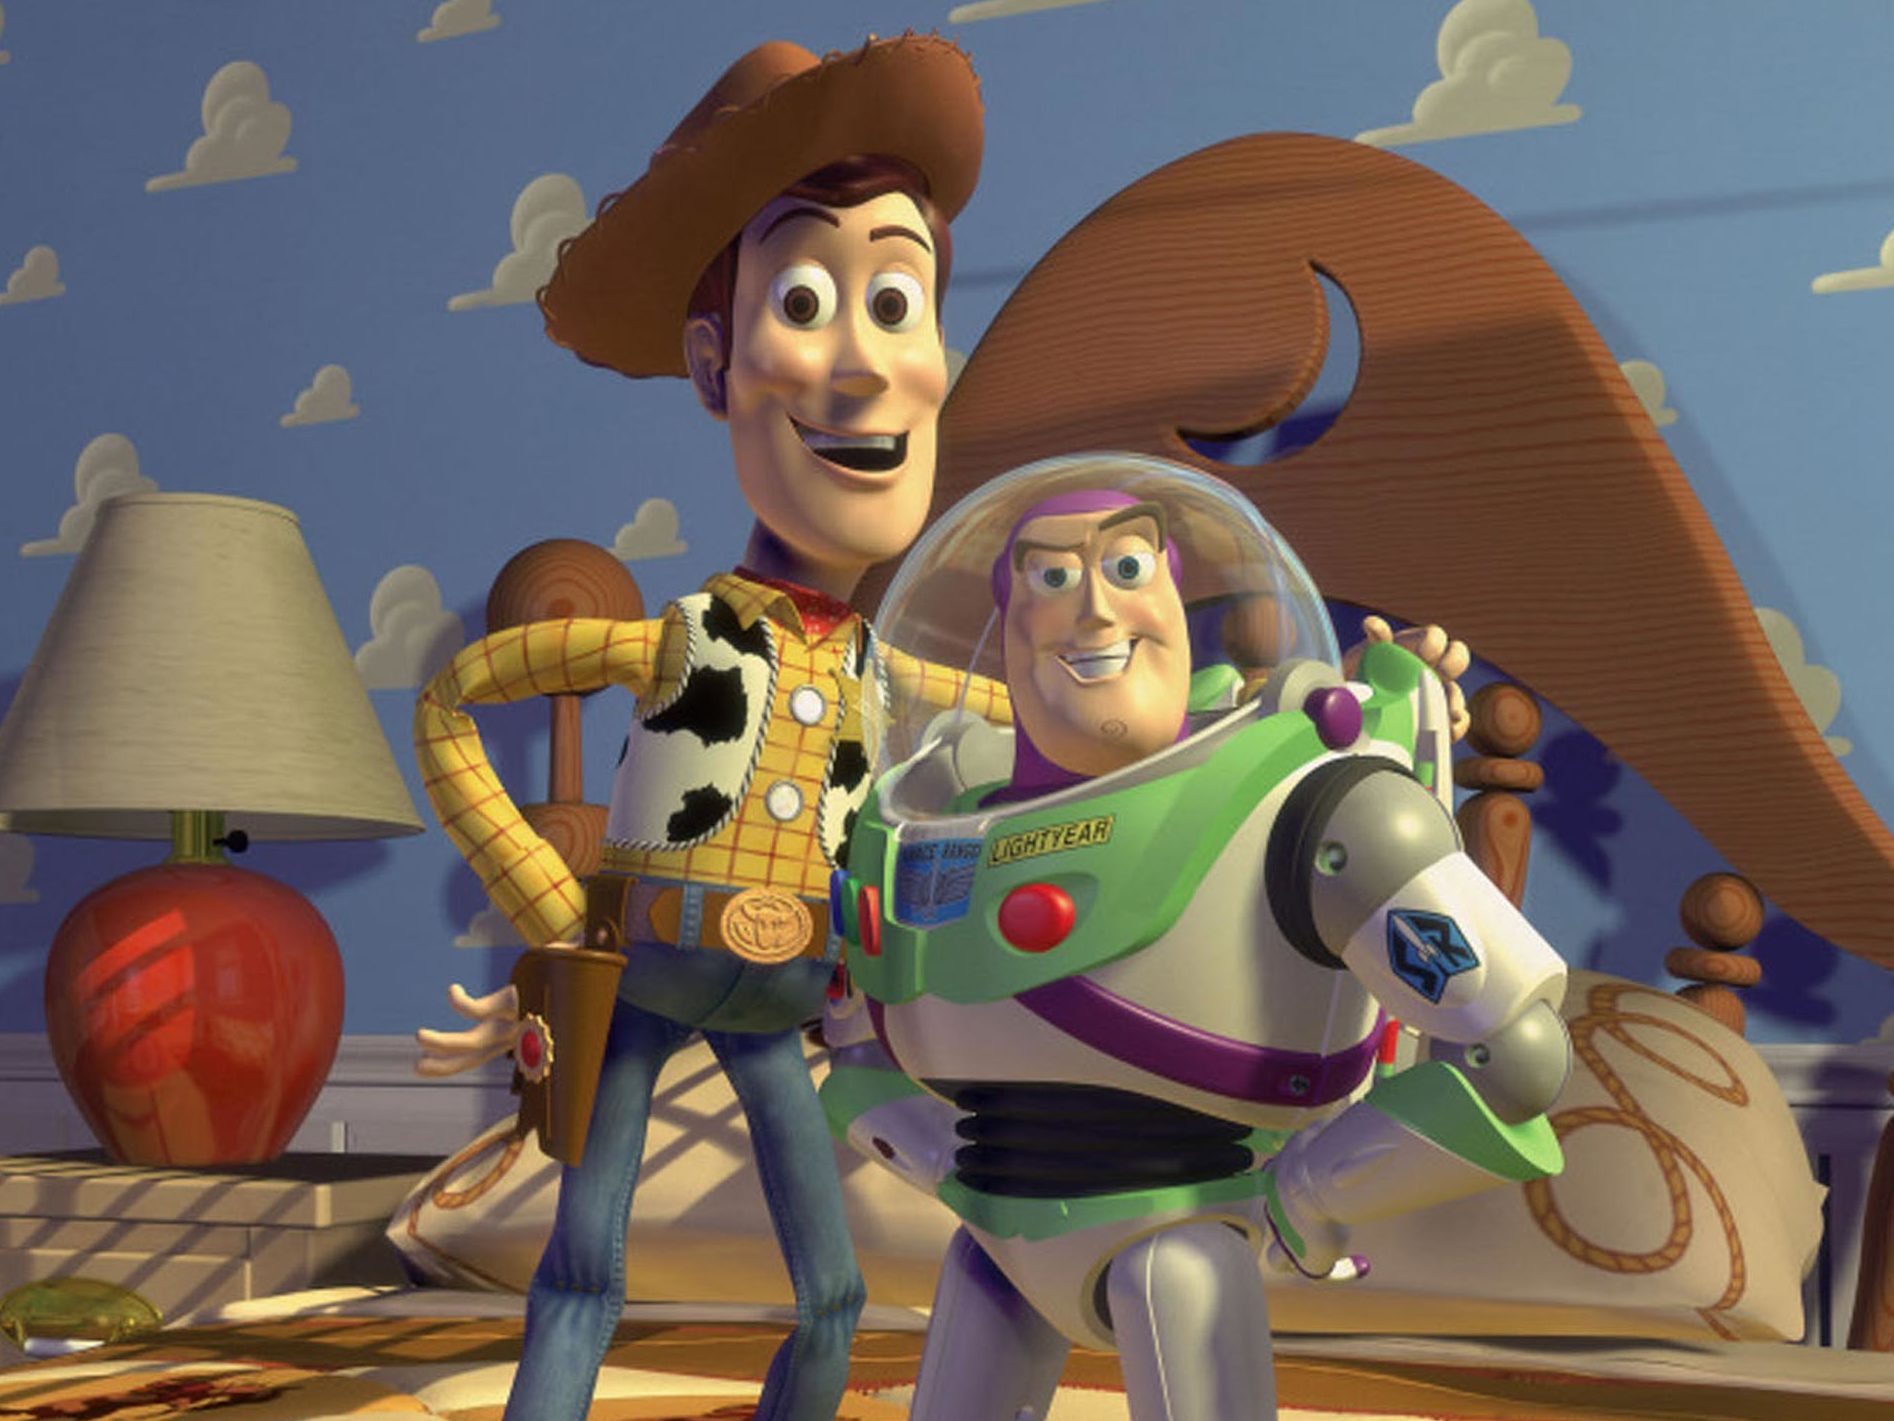 Toy Story is one of Pixar's 13 films to have music from its score performed by the Royal Philharmonic Concert Orchestra at Pixar in Concert on Saturday 22 February